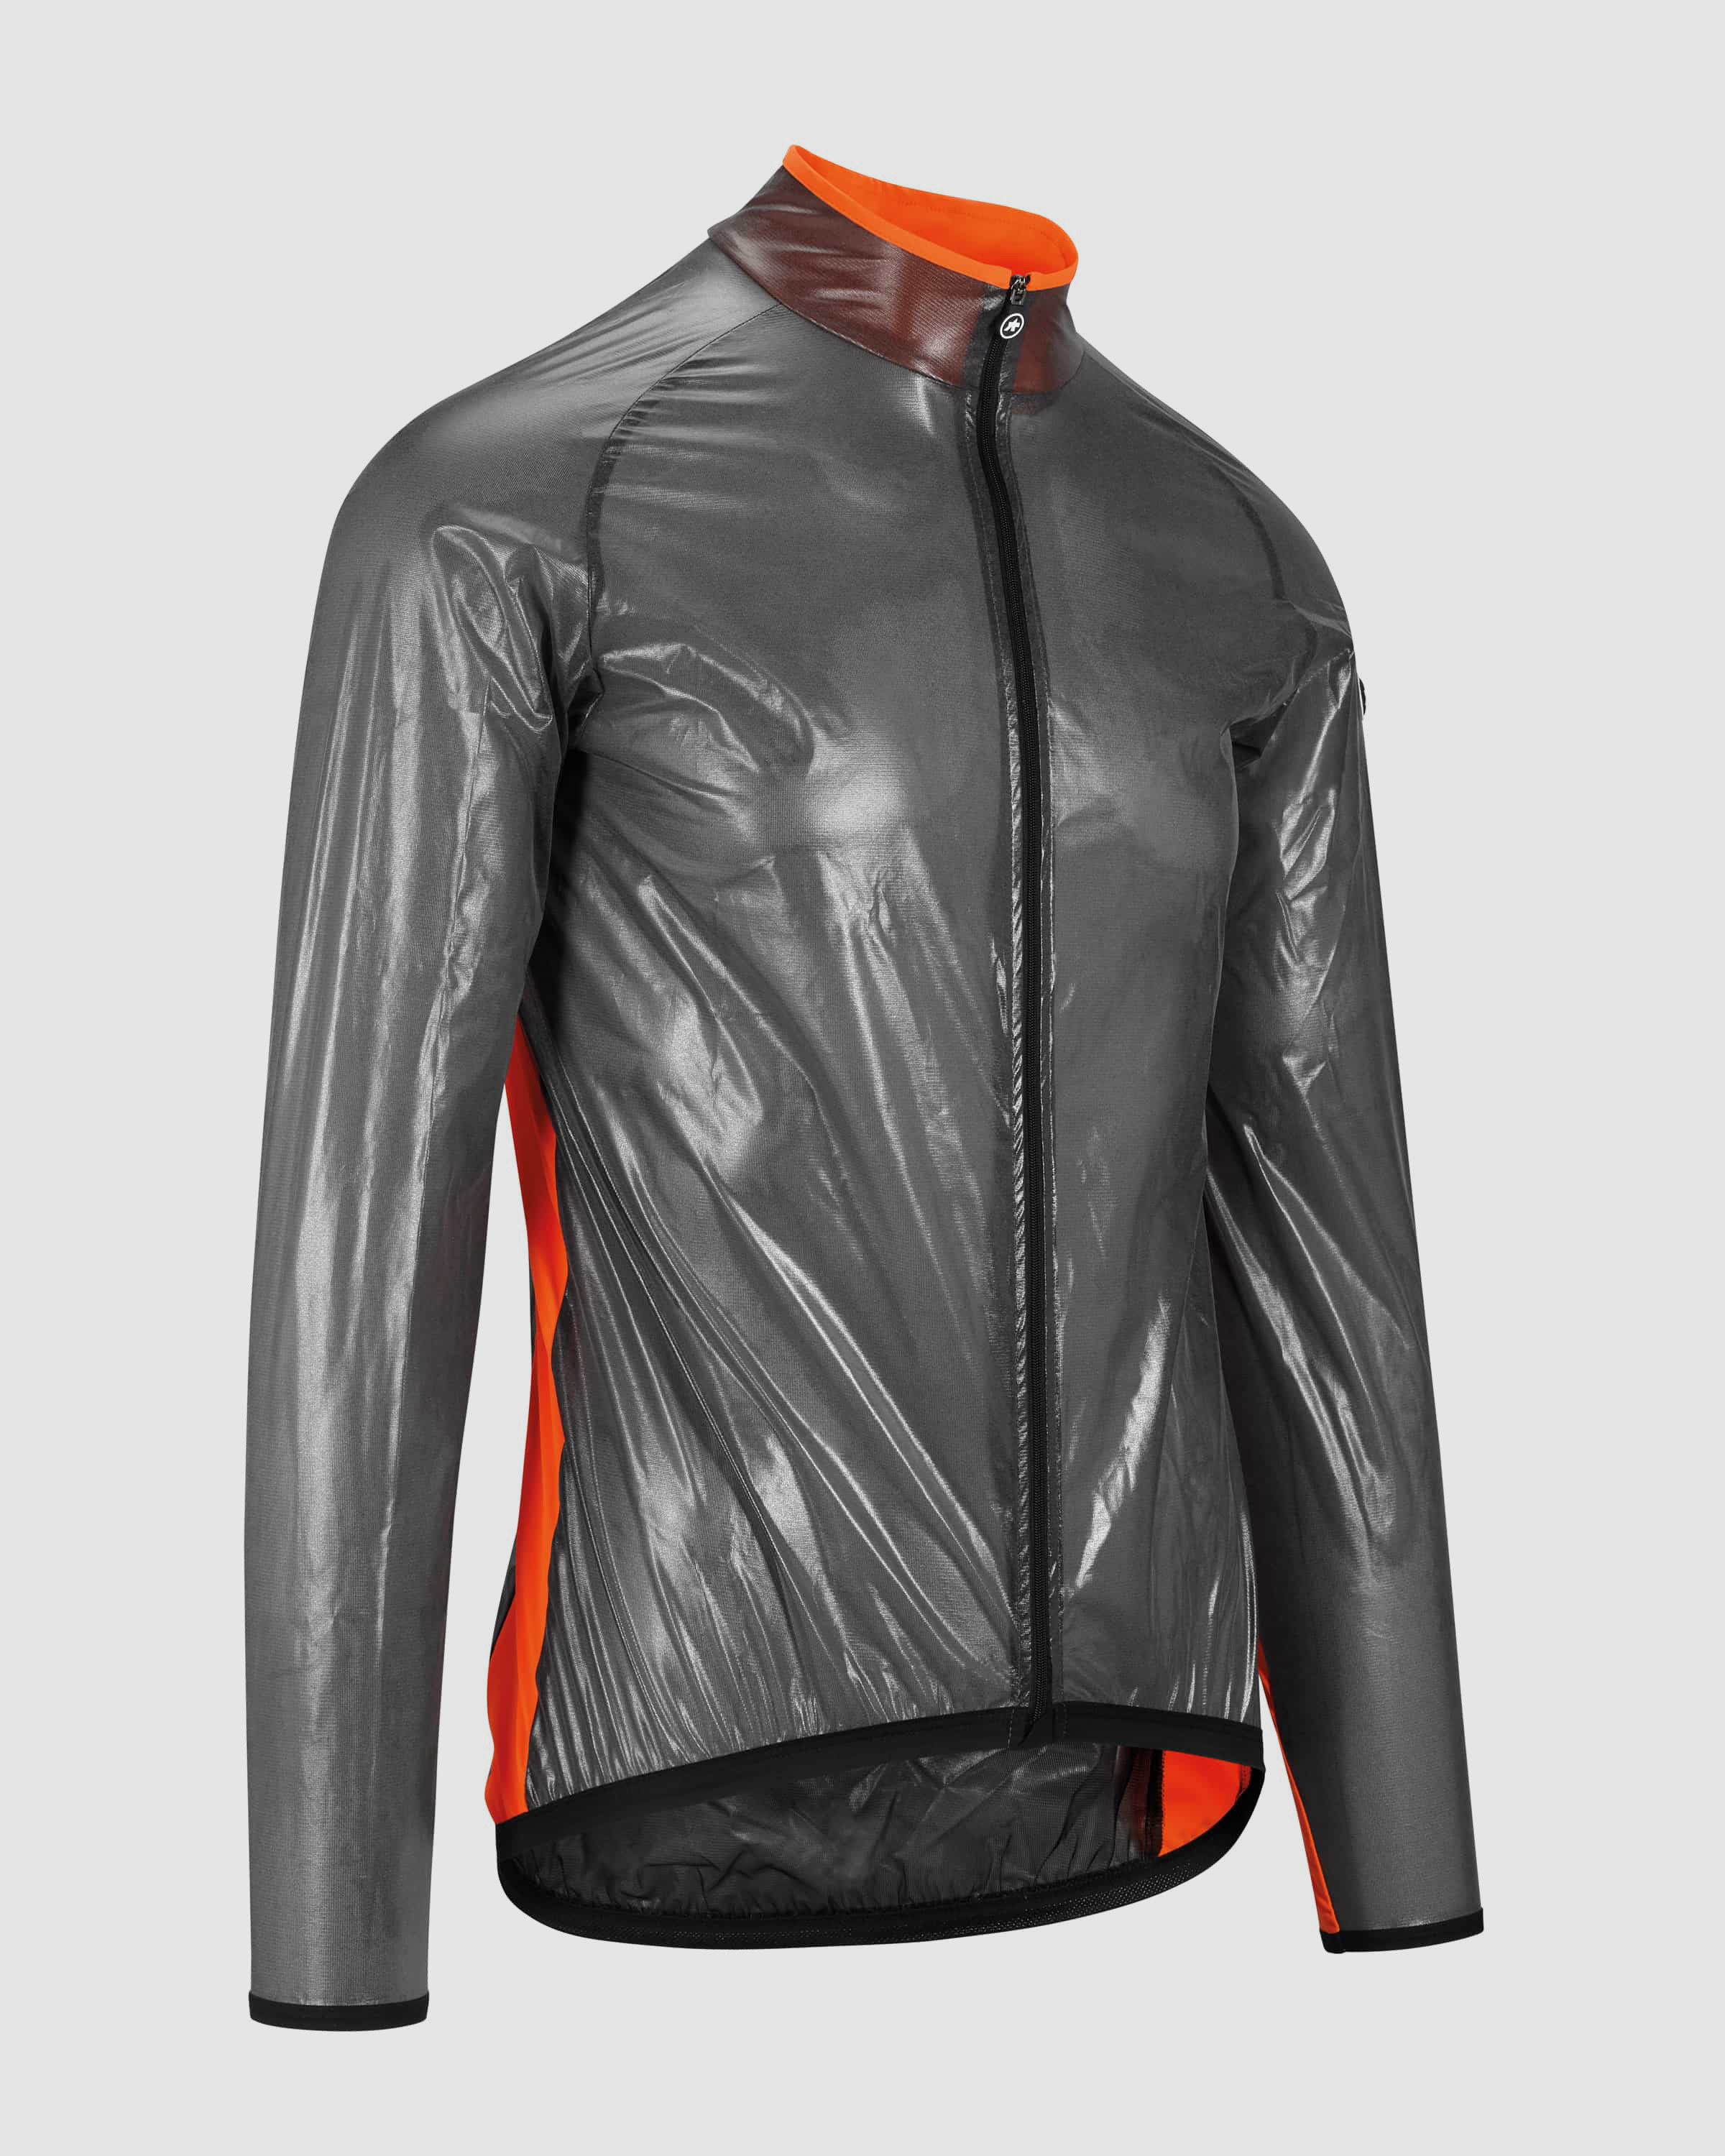 MILLE GT Clima Jacket EVO - ASSOS Of Switzerland - Official Outlet